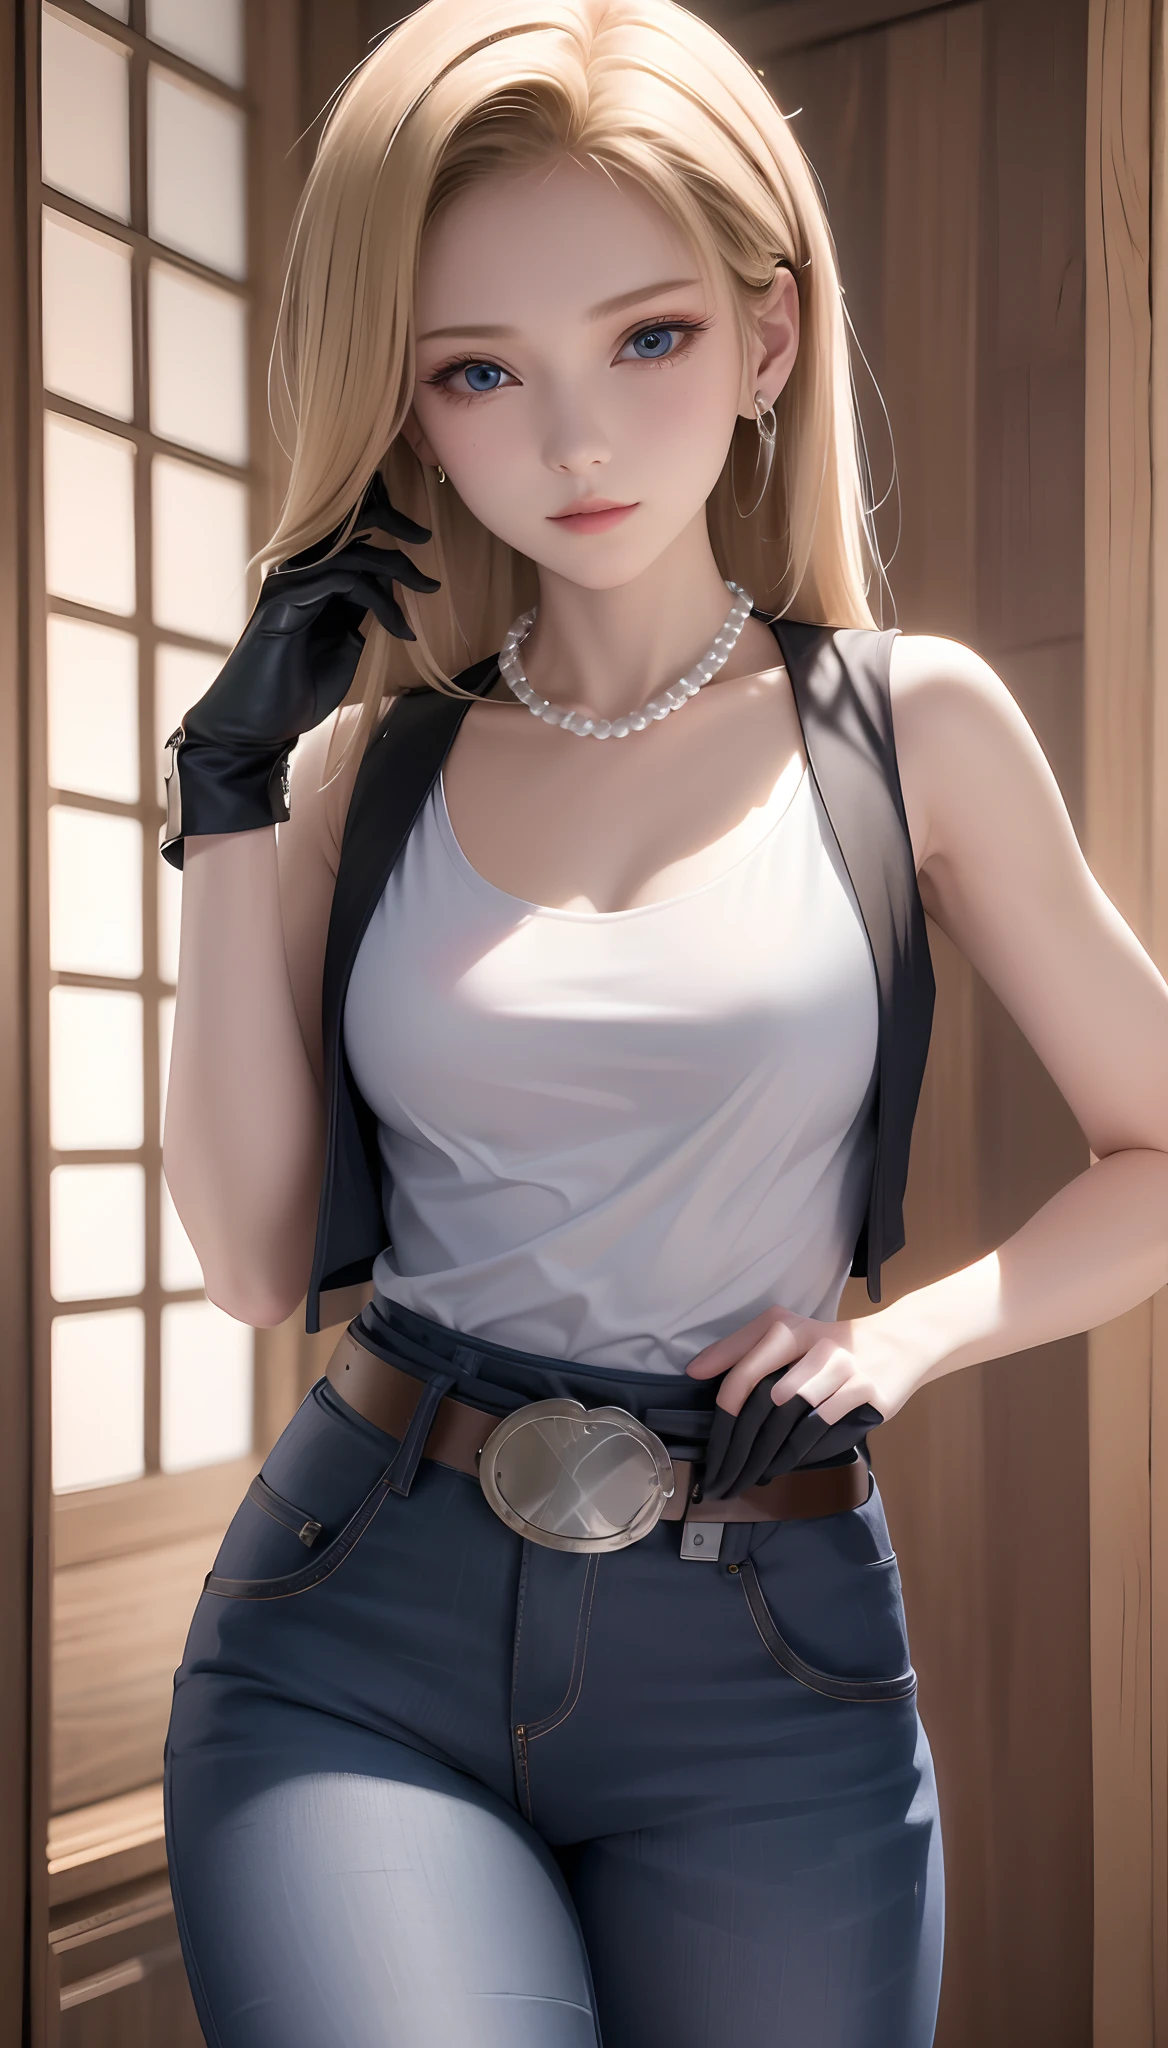 8K、Actual image、intricate detailes、Ultra-detail、(Photorealsitic)、
and18, 1girl in, android 18, blonde  hair, blue eyess, a belt, GENDER, pearls_Necklace, A bracelet, Black Gloves, white  shirt, length hair, shortsleeves, earrings, Blue Pants, open vest, Black vest,
Serene、signature